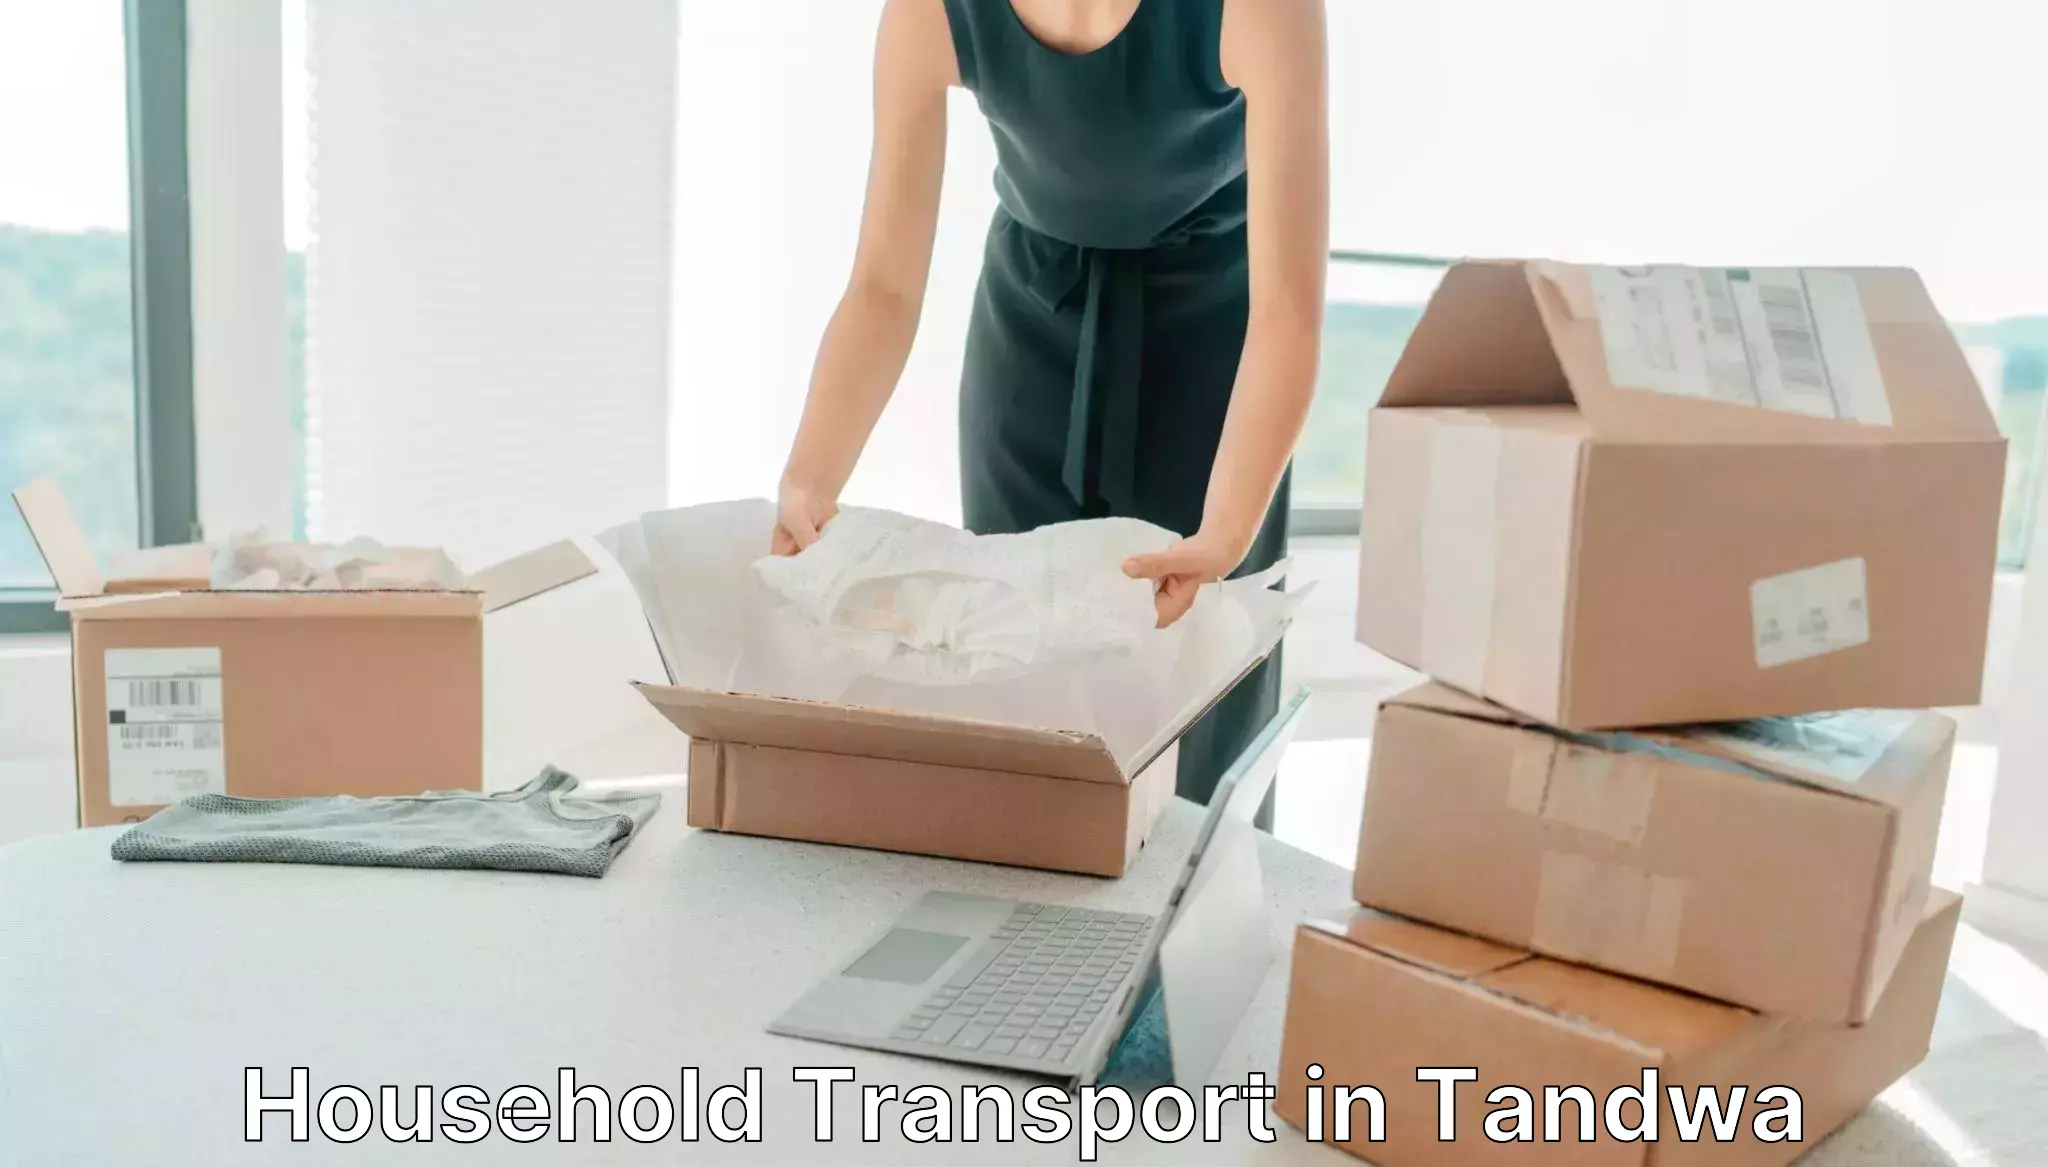 Reliable furniture transport in Tandwa